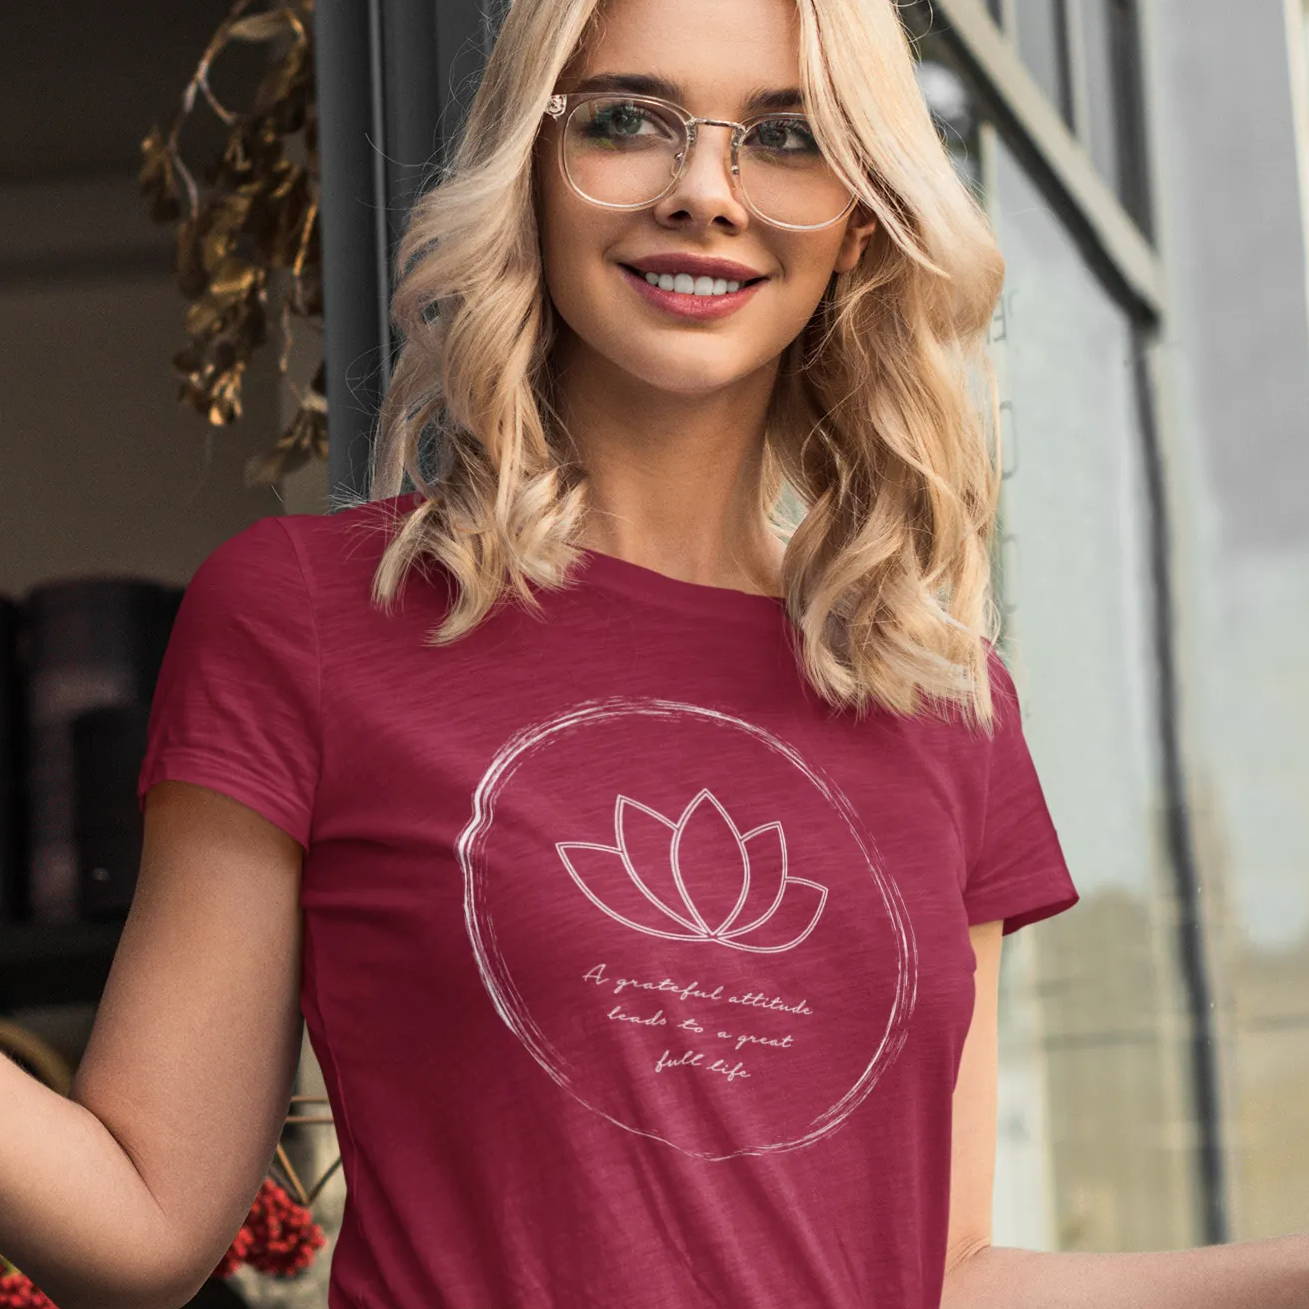 A woman wearing a red shirt with a lotus flower design